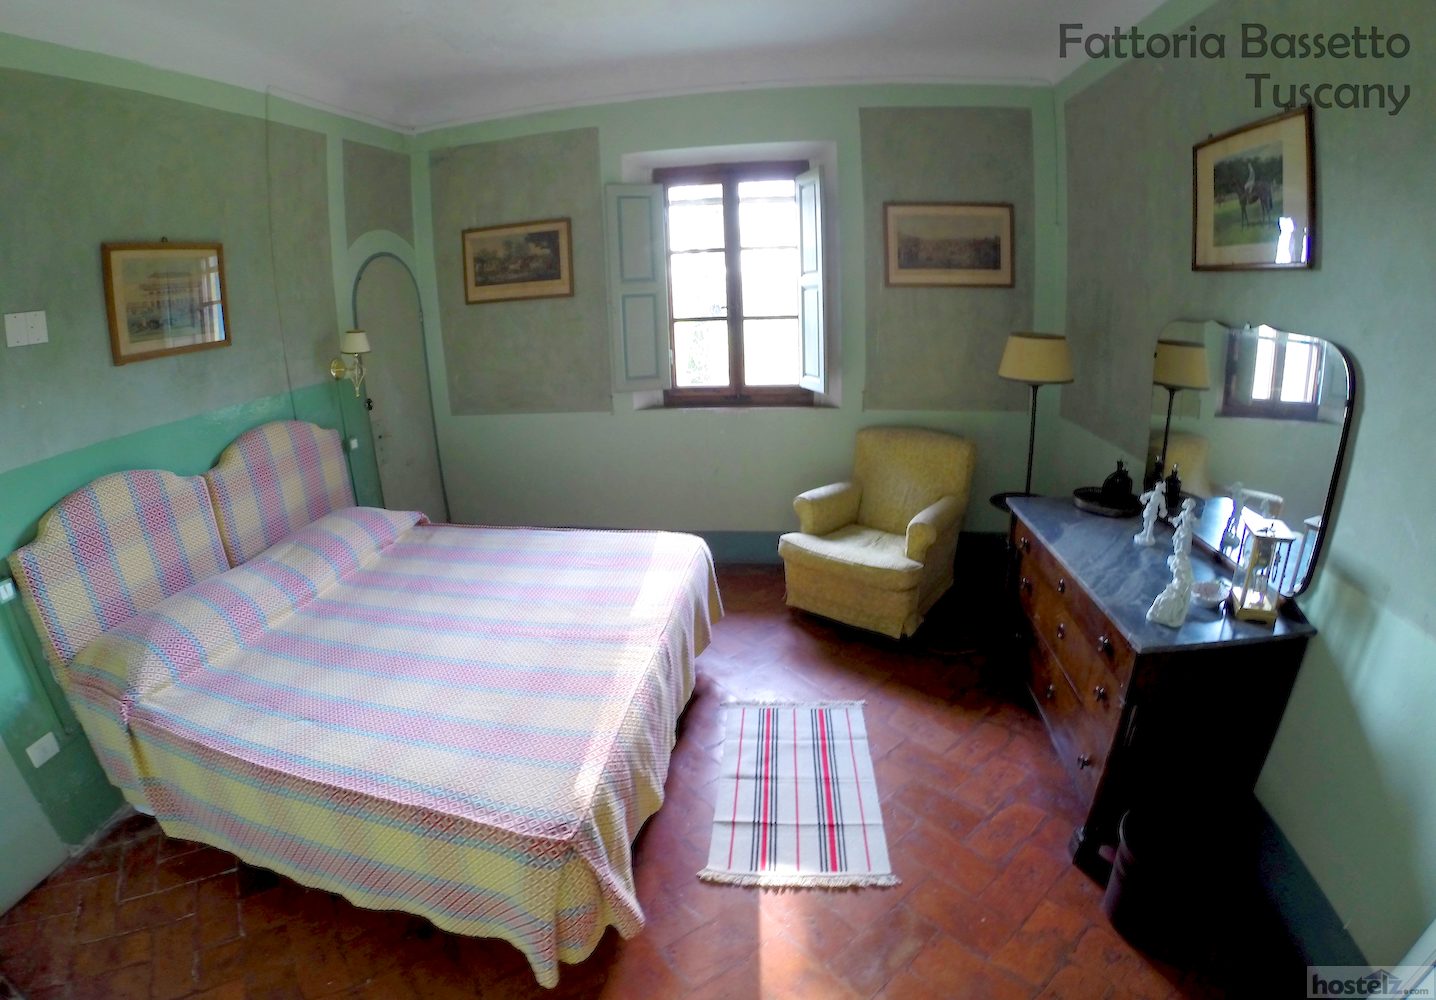 Private double room